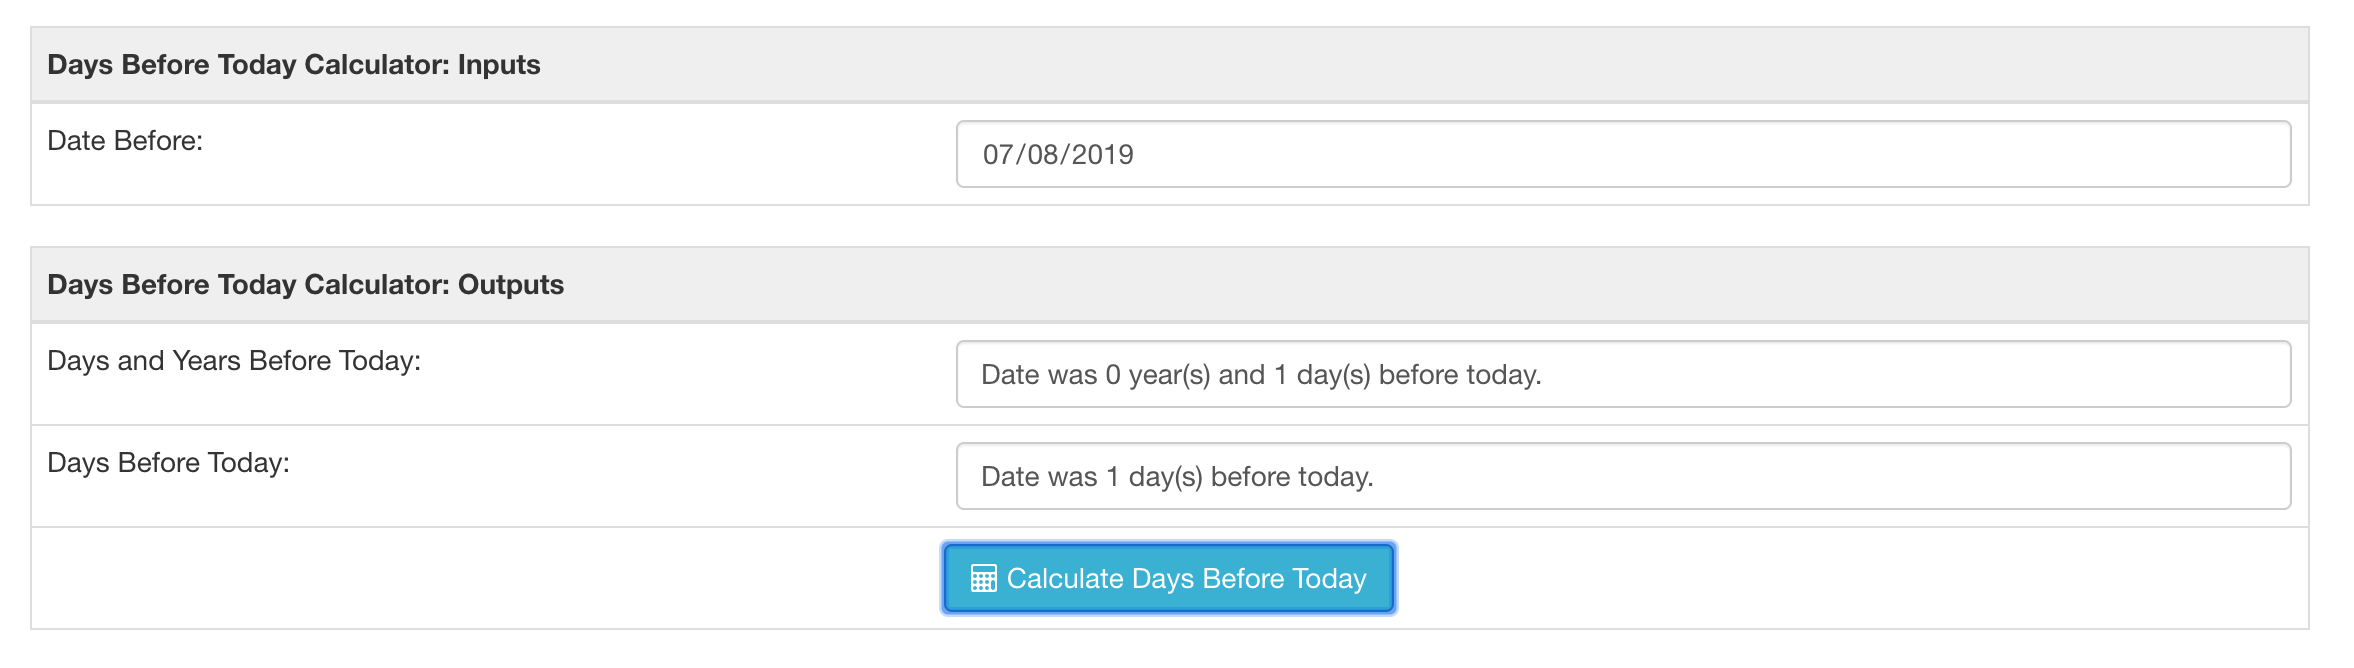 Days Since Date Calculator See How Many Days It Was Before Today